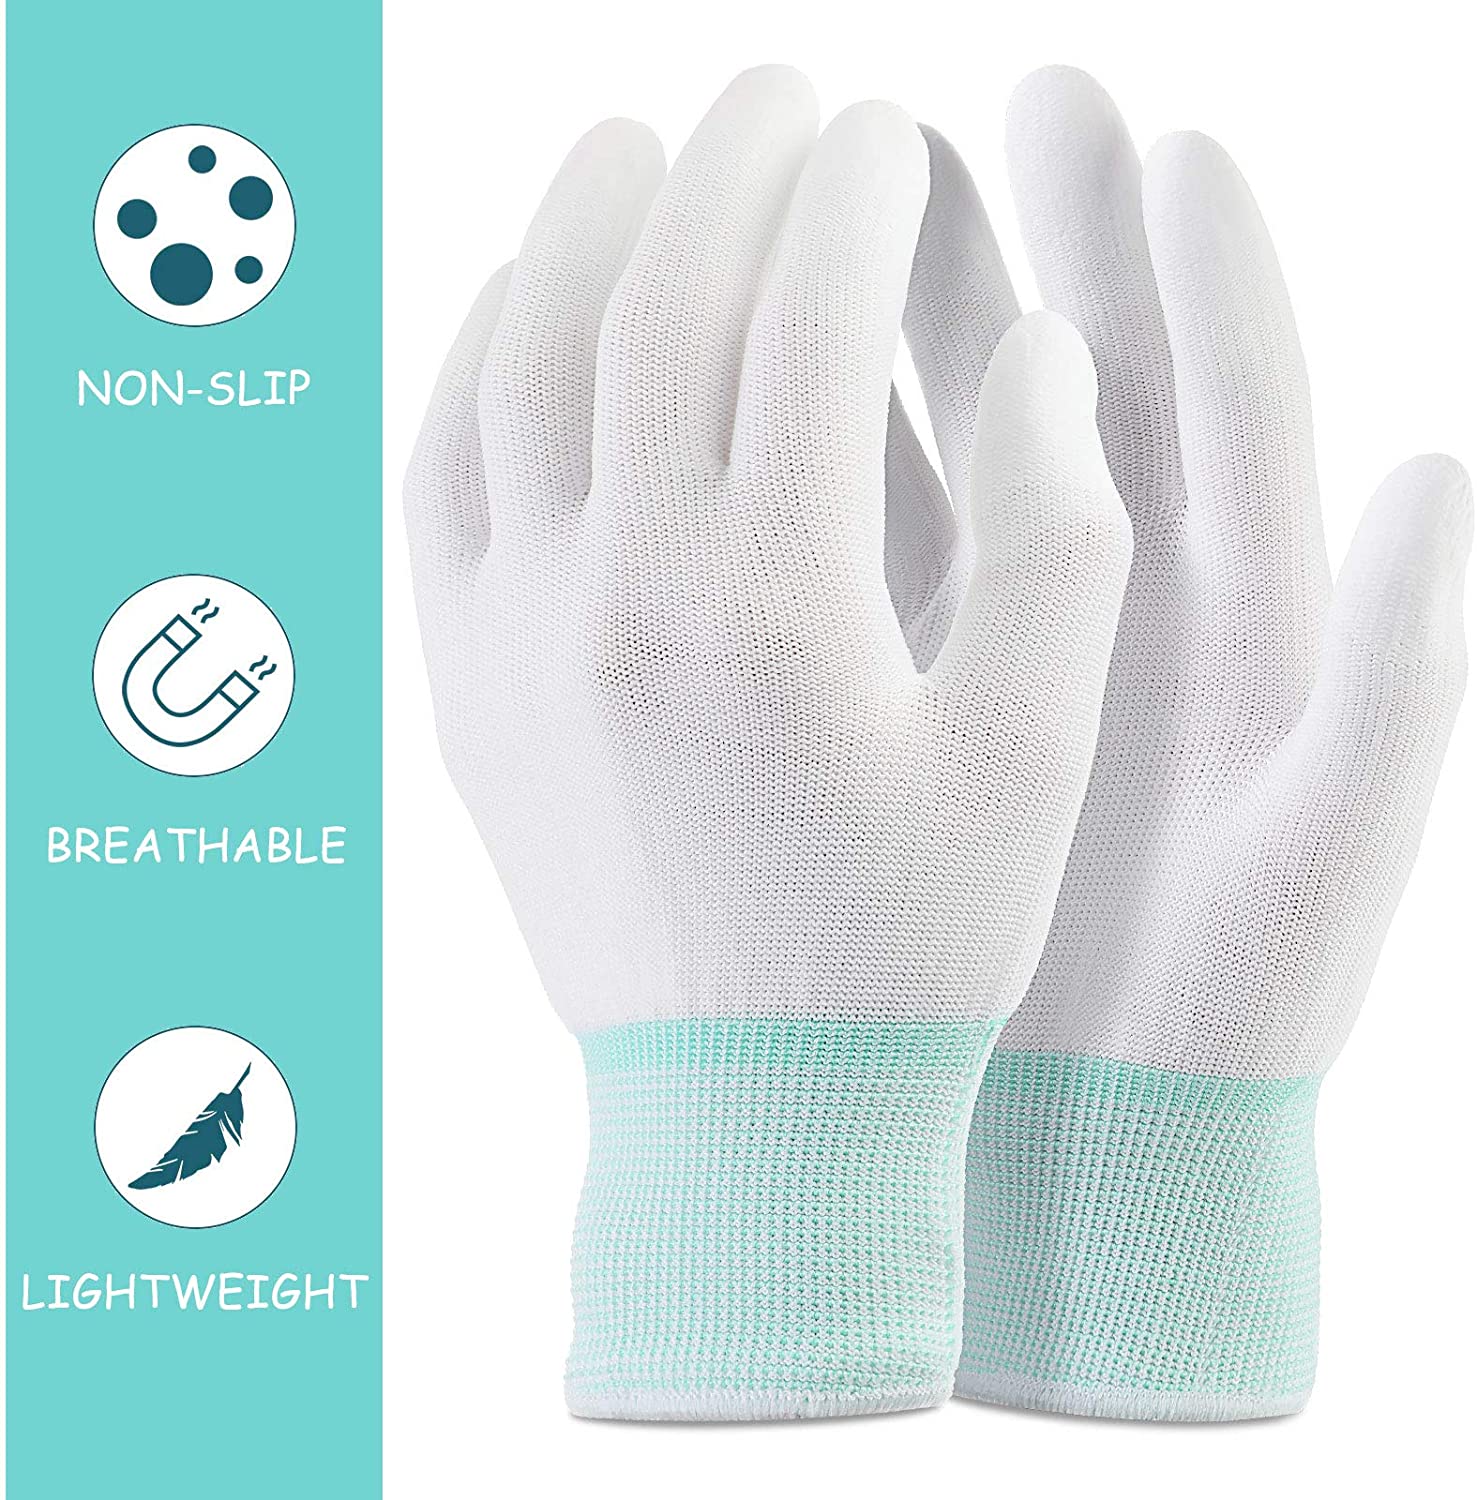 Sewing Gloves - 6 Pairs